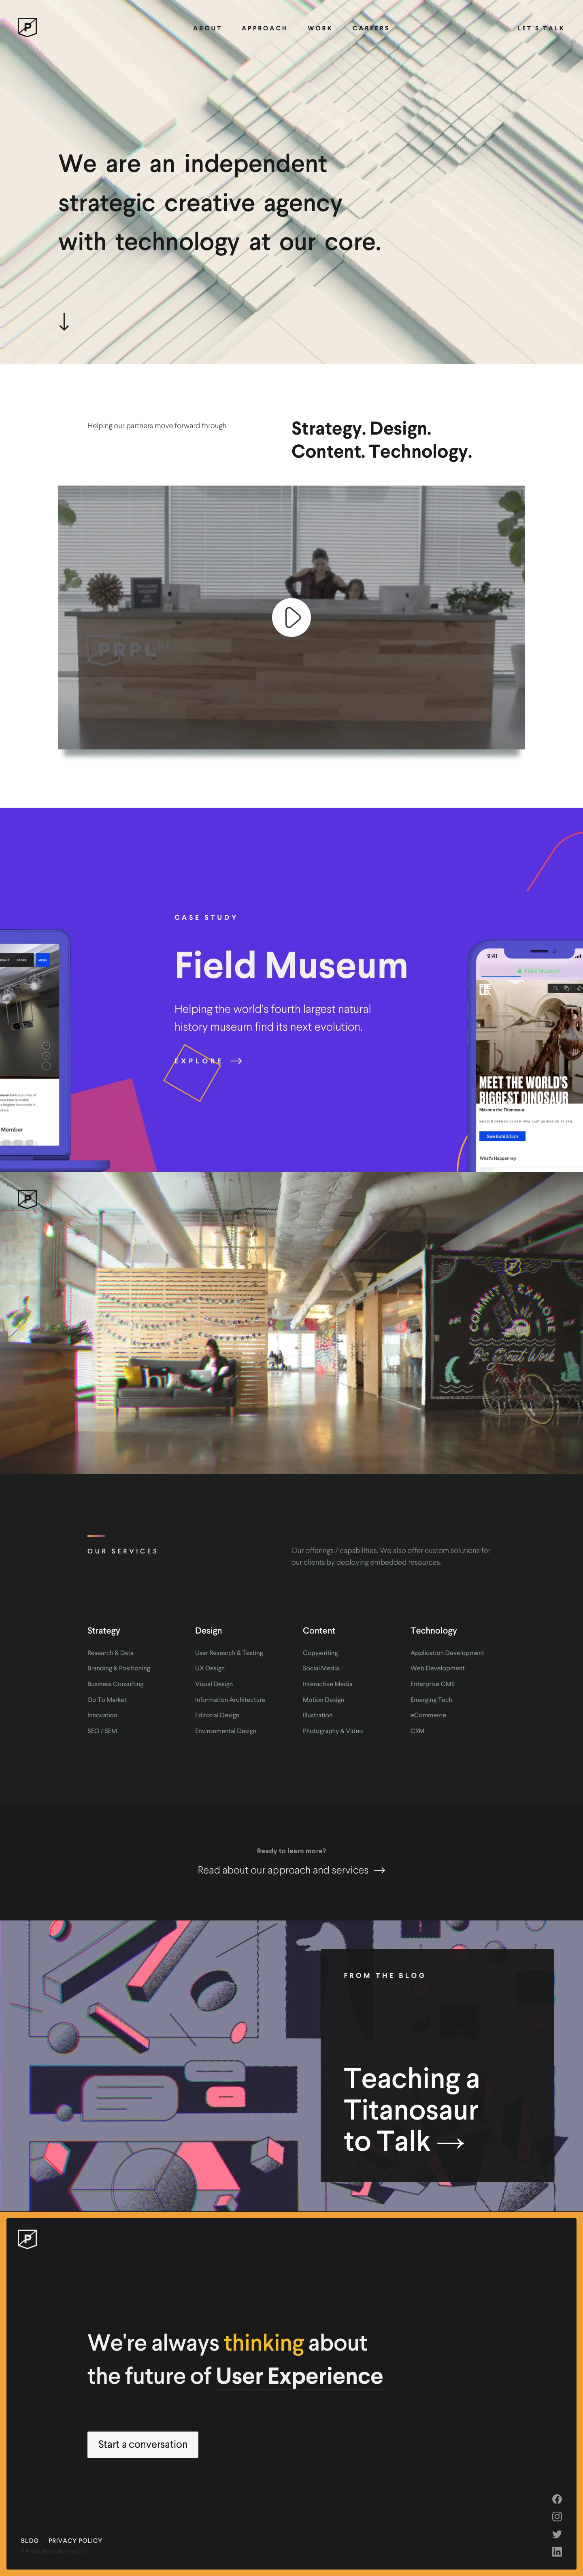 Purple Rock Scissors Landing Page Example: We are an independent strategic creative agency with technology at our core.